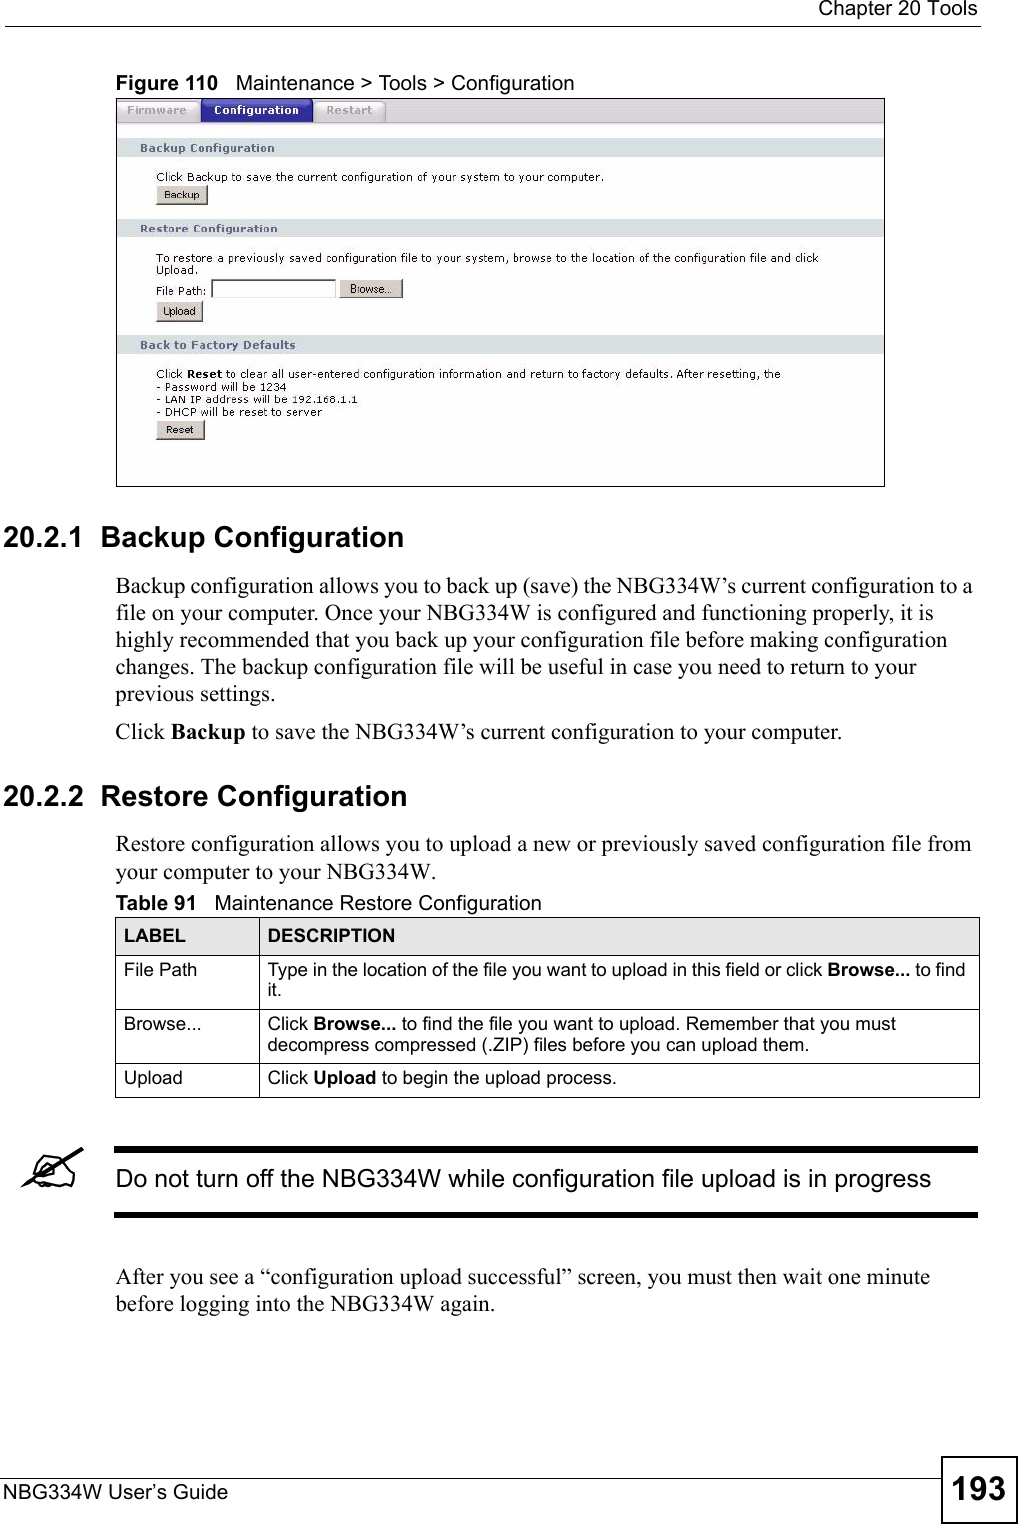  Chapter 20 ToolsNBG334W User’s Guide 193Figure 110   Maintenance &gt; Tools &gt; Configuration 20.2.1  Backup ConfigurationBackup configuration allows you to back up (save) the NBG334W’s current configuration to a file on your computer. Once your NBG334W is configured and functioning properly, it is highly recommended that you back up your configuration file before making configuration changes. The backup configuration file will be useful in case you need to return to your previous settings. Click Backup to save the NBG334W’s current configuration to your computer.20.2.2  Restore ConfigurationRestore configuration allows you to upload a new or previously saved configuration file from your computer to your NBG334W.&quot;Do not turn off the NBG334W while configuration file upload is in progressAfter you see a “configuration upload successful” screen, you must then wait one minute before logging into the NBG334W again. Table 91   Maintenance Restore ConfigurationLABEL DESCRIPTIONFile Path  Type in the location of the file you want to upload in this field or click Browse... to find it.Browse...  Click Browse... to find the file you want to upload. Remember that you must decompress compressed (.ZIP) files before you can upload them. Upload  Click Upload to begin the upload process.